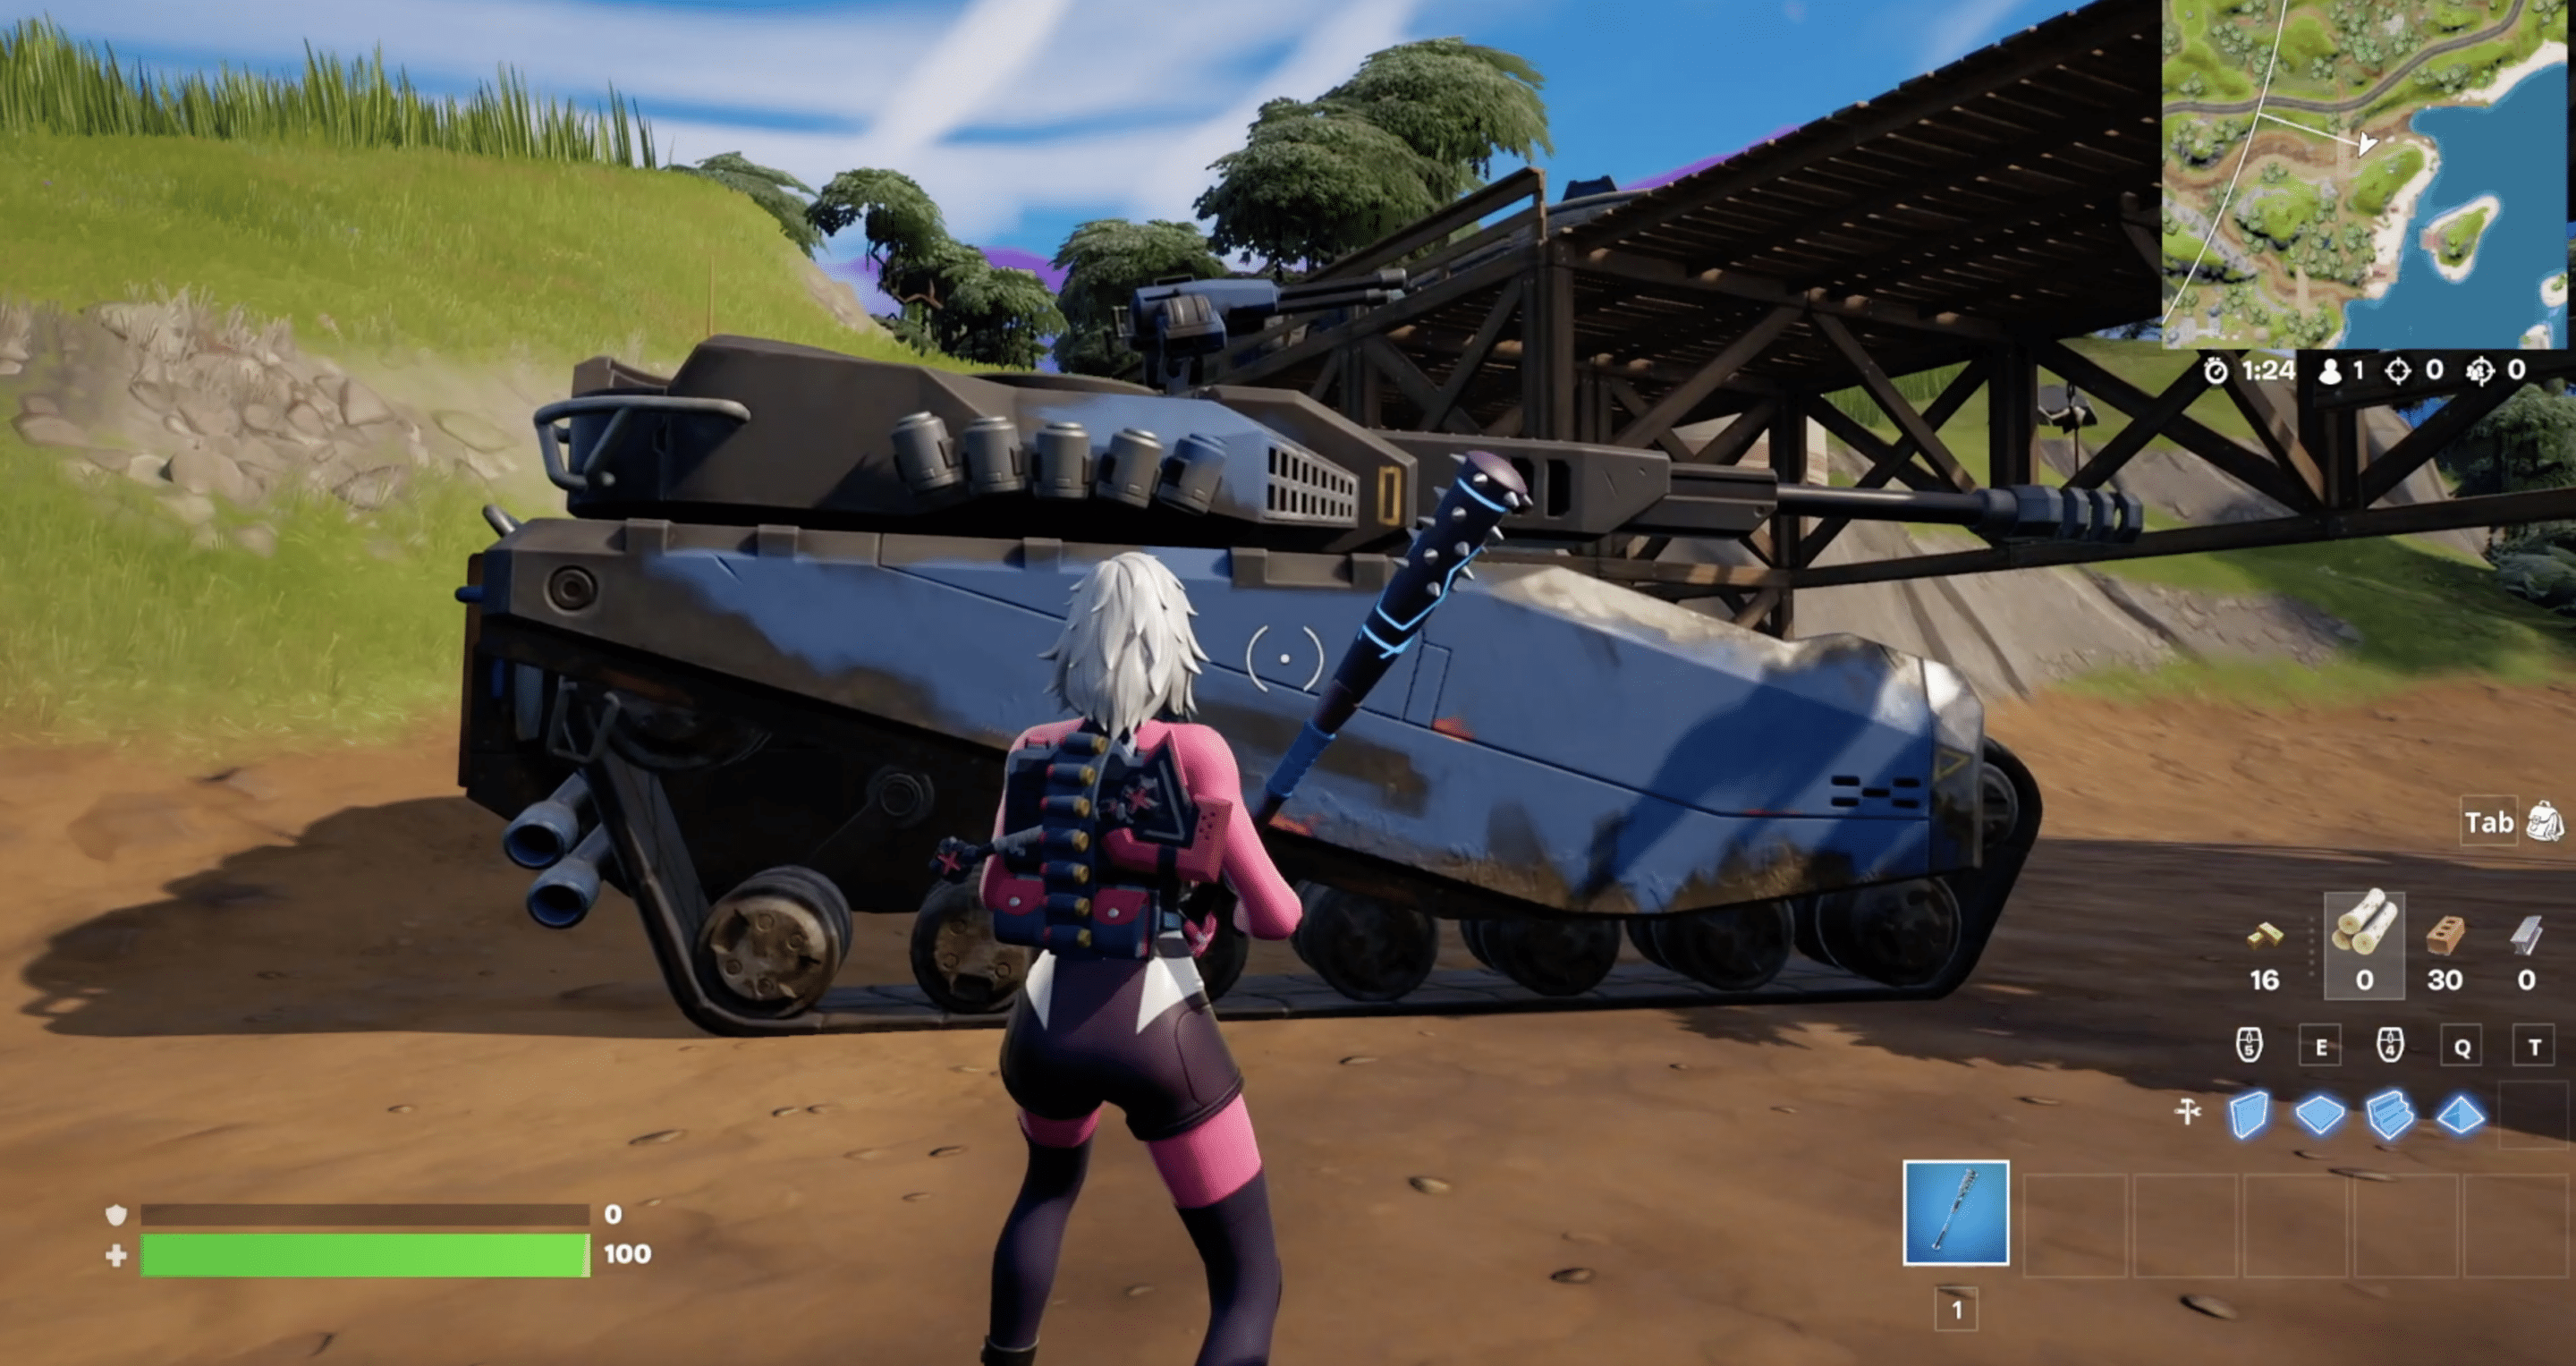 Flipping a car or tank in fortnite